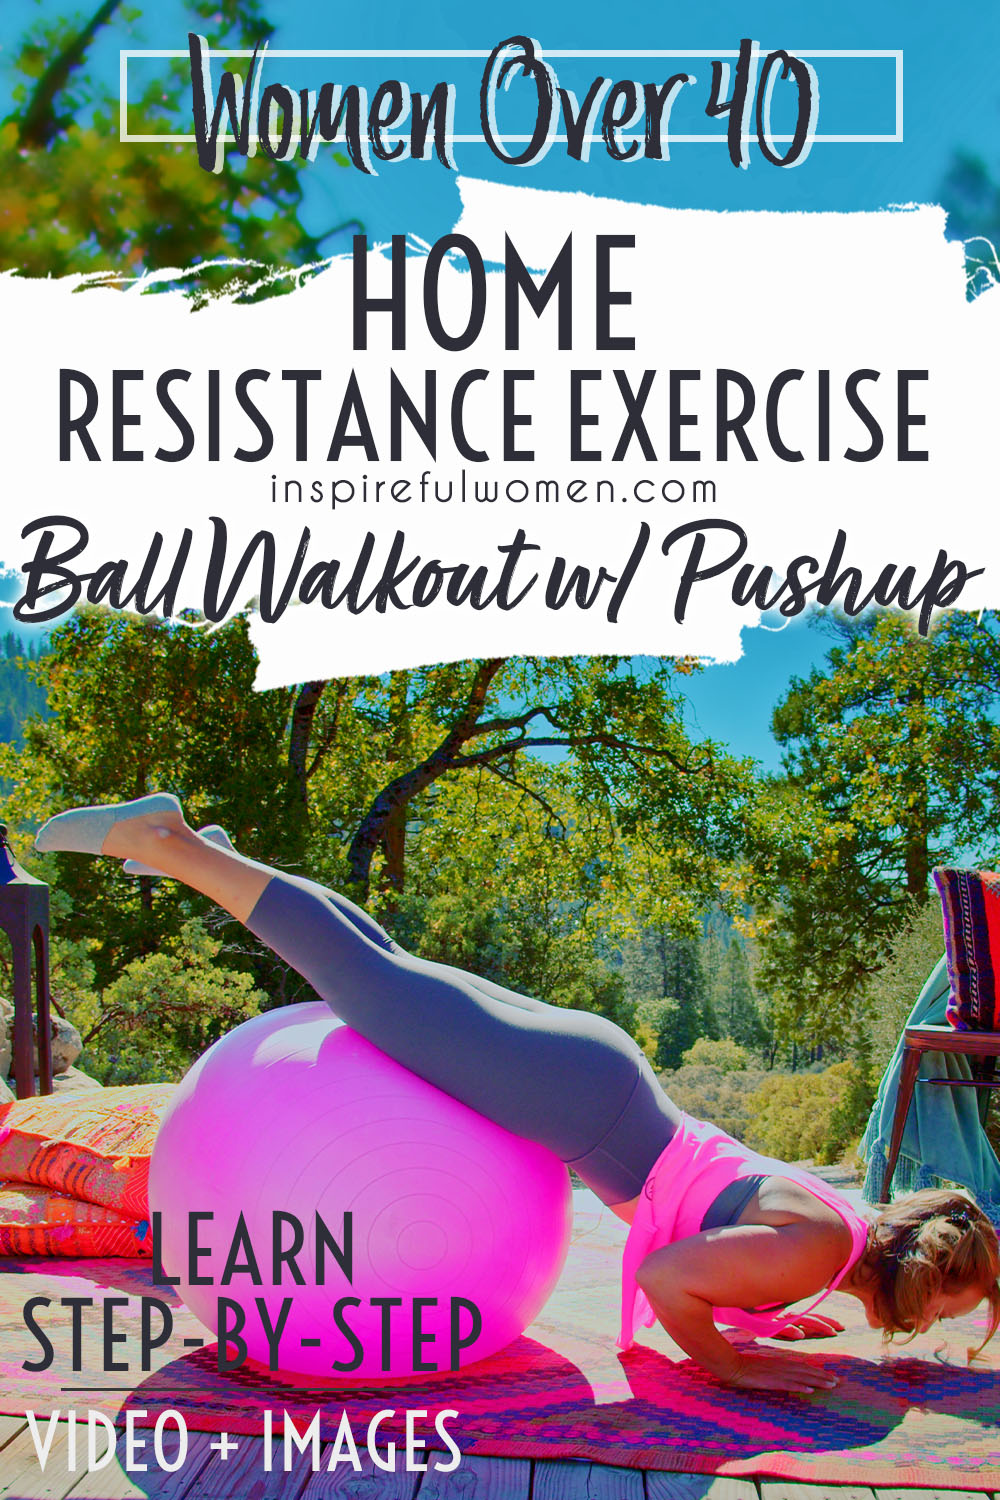 gym-ball-walkouts-with-pushup-stomach-ab-core-resistance-exercise-women-over-40